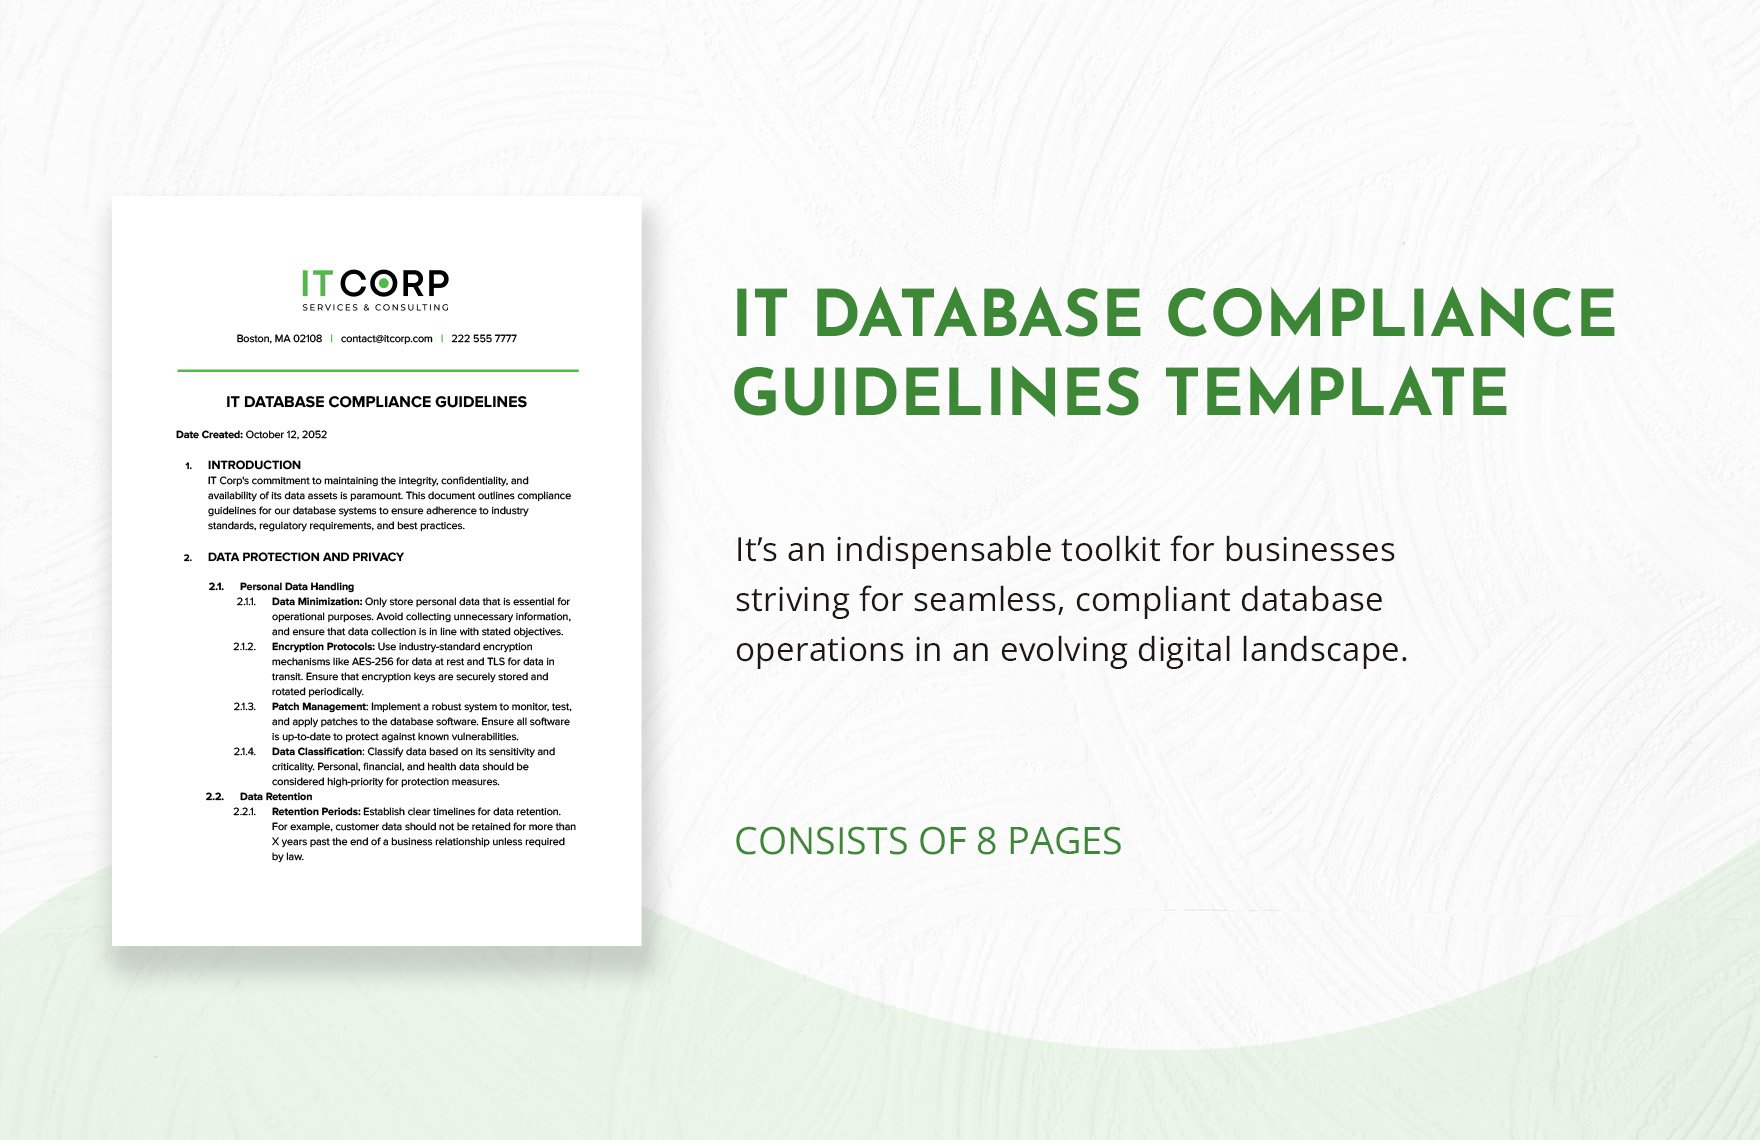 IT Database Compliance Guidelines Template in Word, Google Docs, PDF